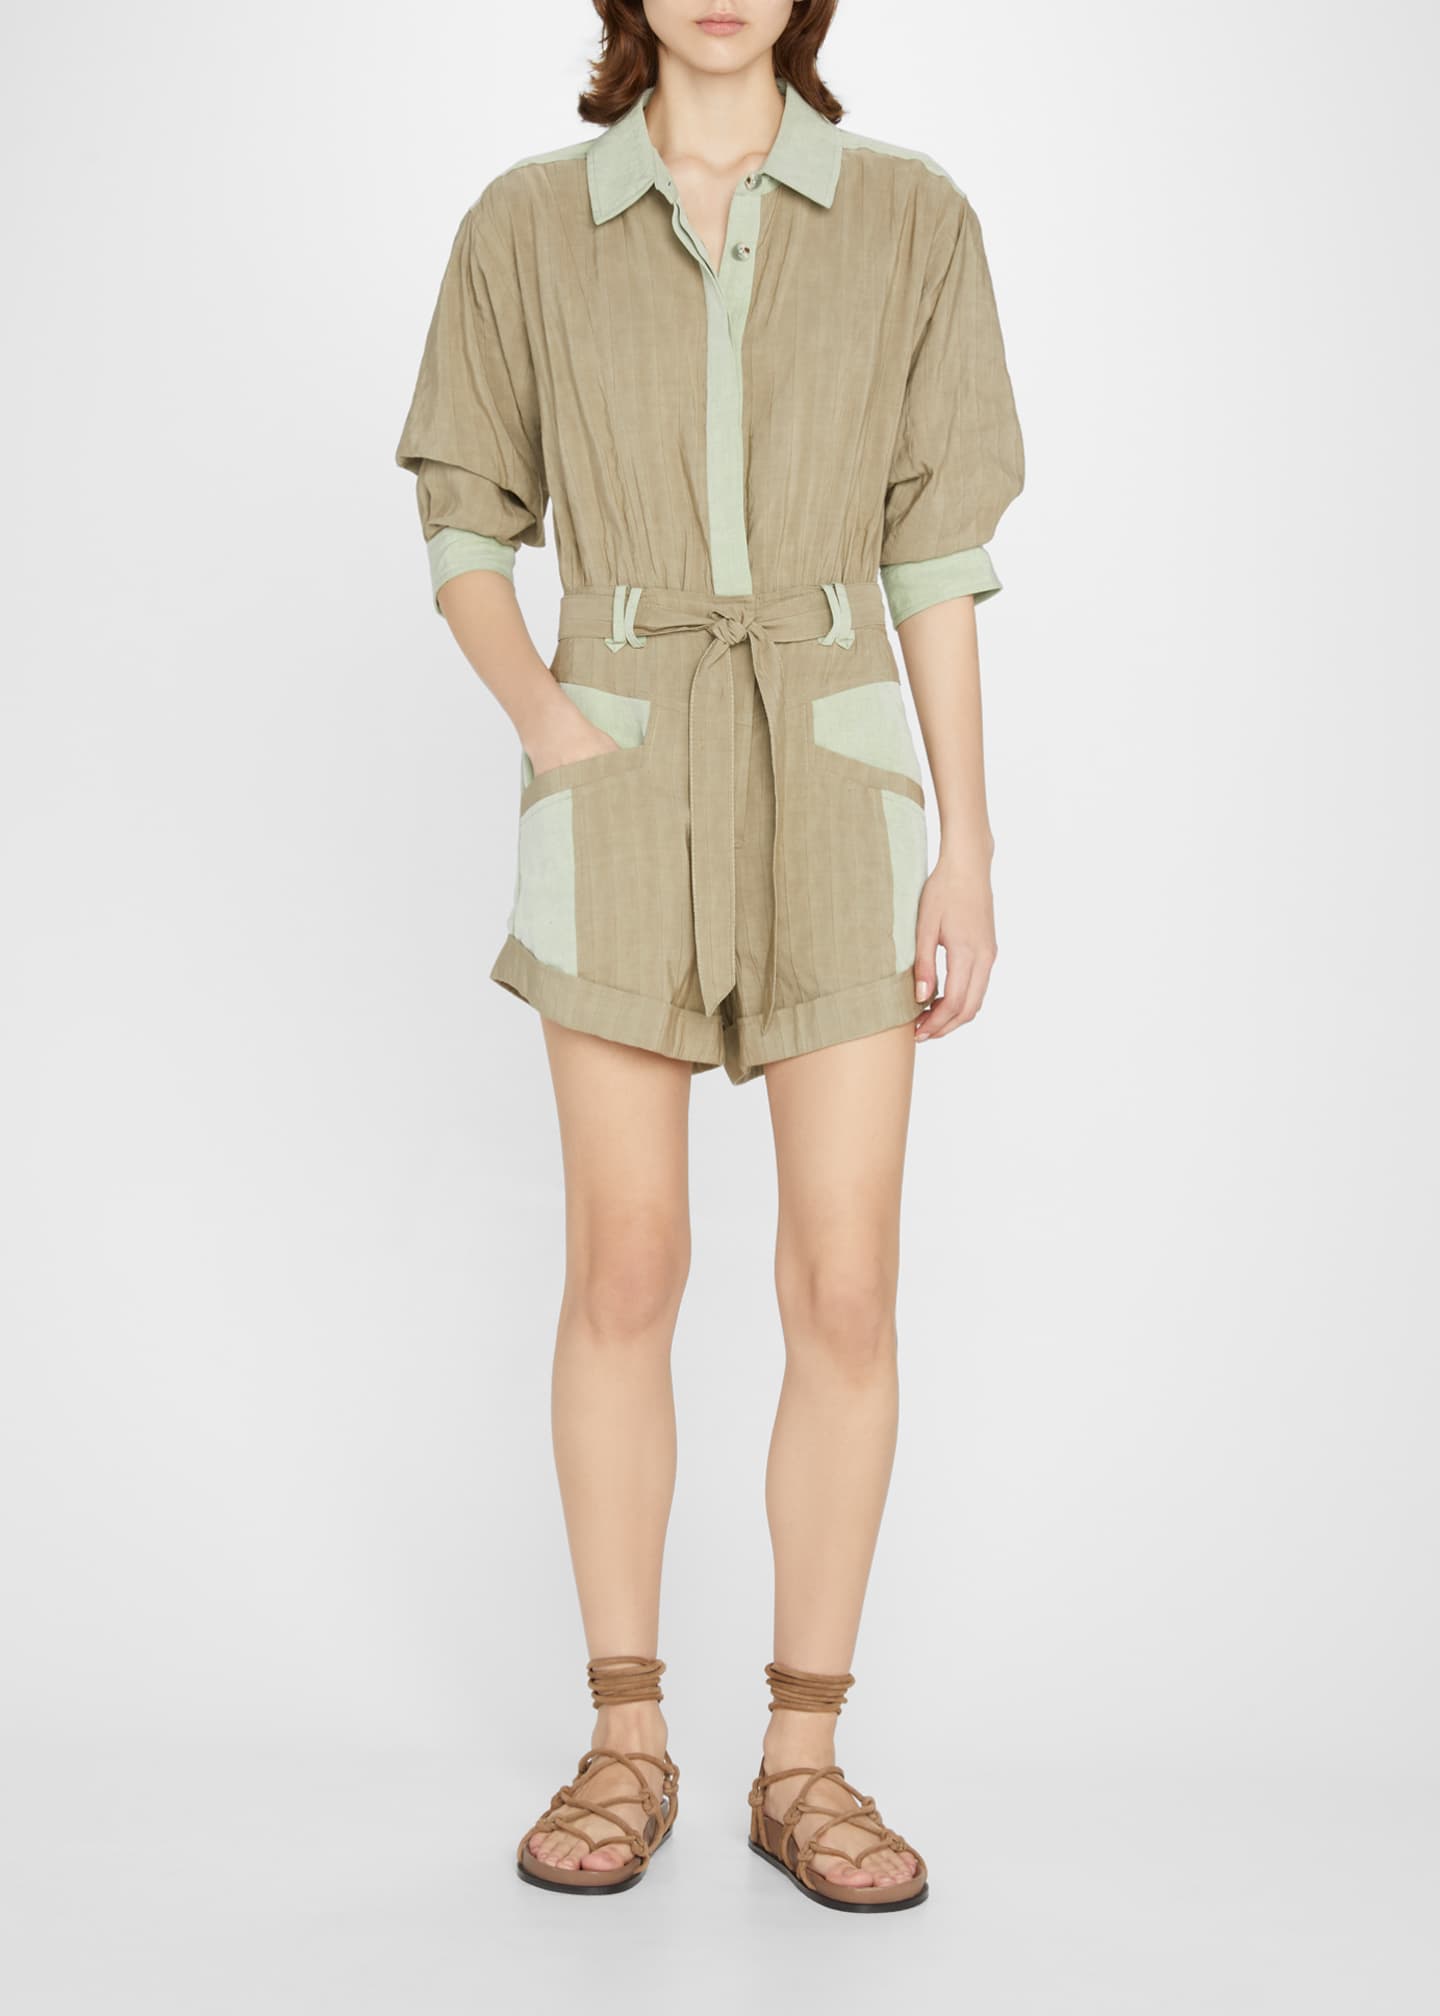 Jonathan Simkhai Linen Aliza Draped Texture Utility Romper in Natural Womens Clothing Jumpsuits and rompers Playsuits 